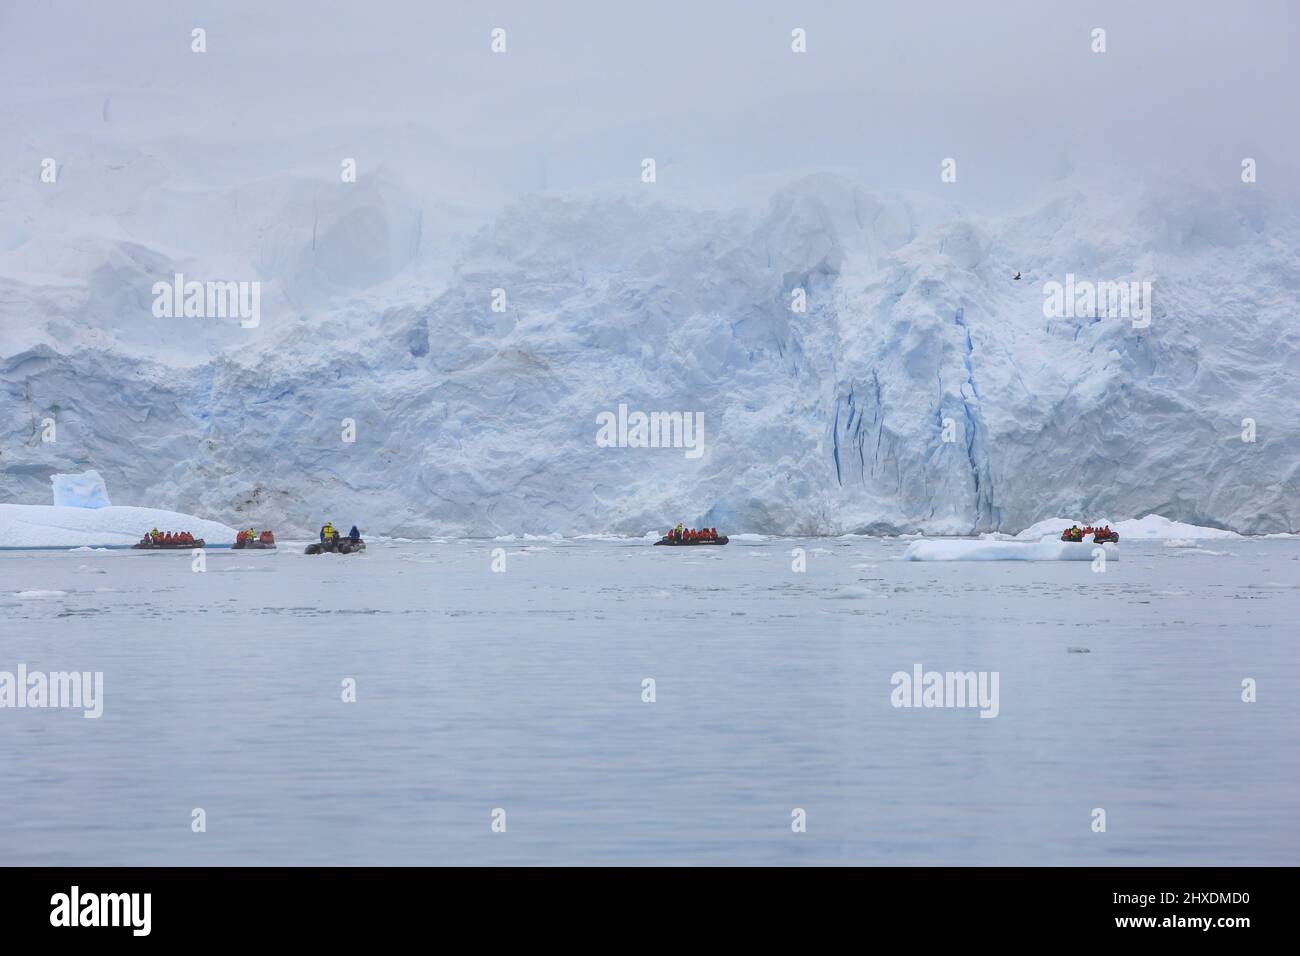 Six zodiac boats (including photographer's) from Le Boreal cruise ship are exploring Skontorp Cove near Brown Station in the Antarctic Peninsula. Stock Photo